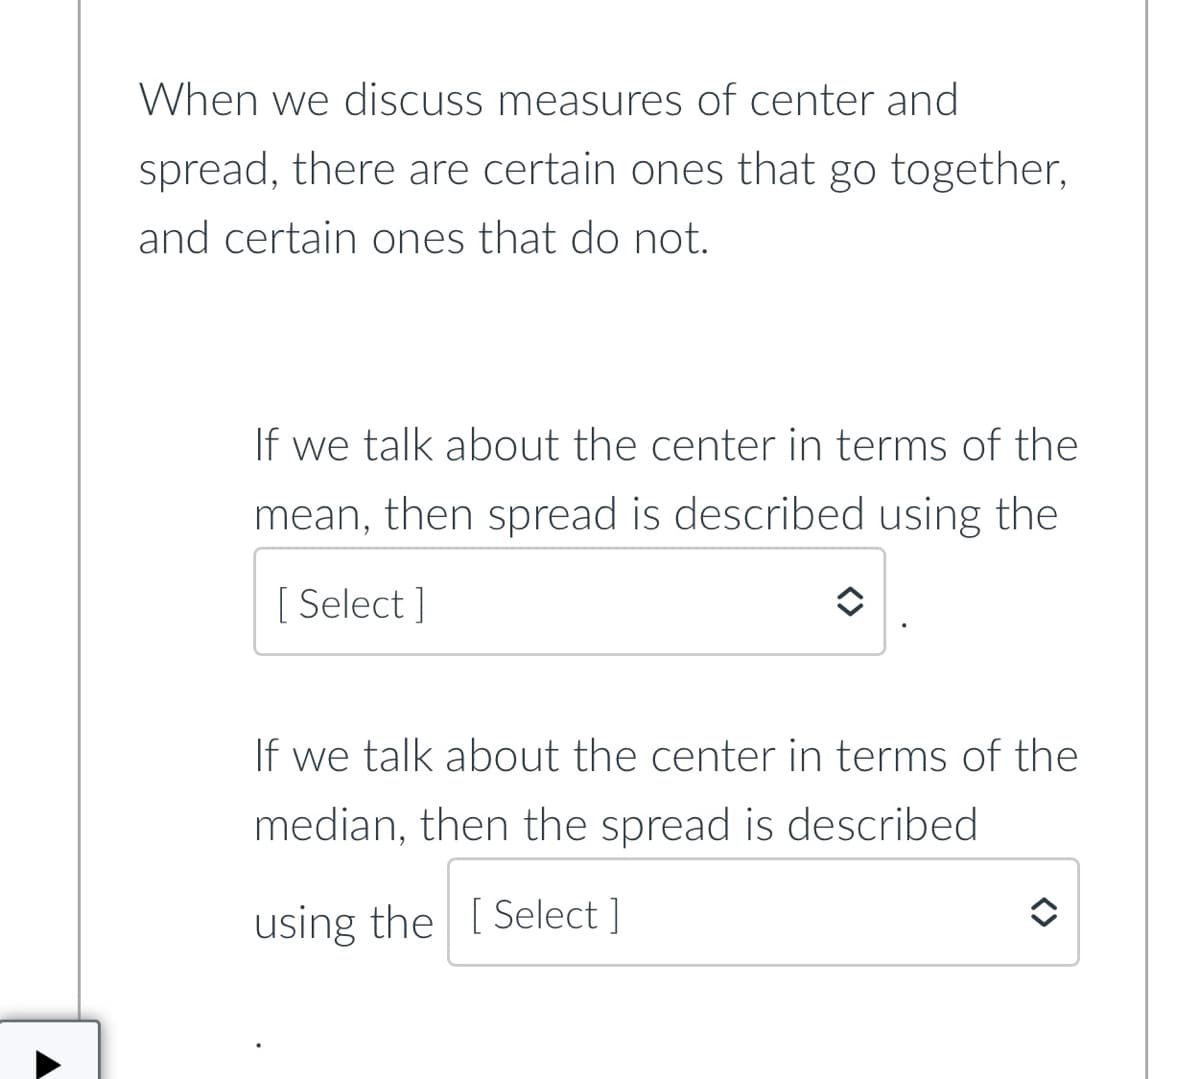 When we discuss measures of center and
spread, there are certain ones that go together,
and certain ones that do not.
If we talk about the center in terms of the
mean, then spread is described using the
[ Select ]
If we talk about the center in terms of the
median, then the spread is described
using the [ Select ]
<>
